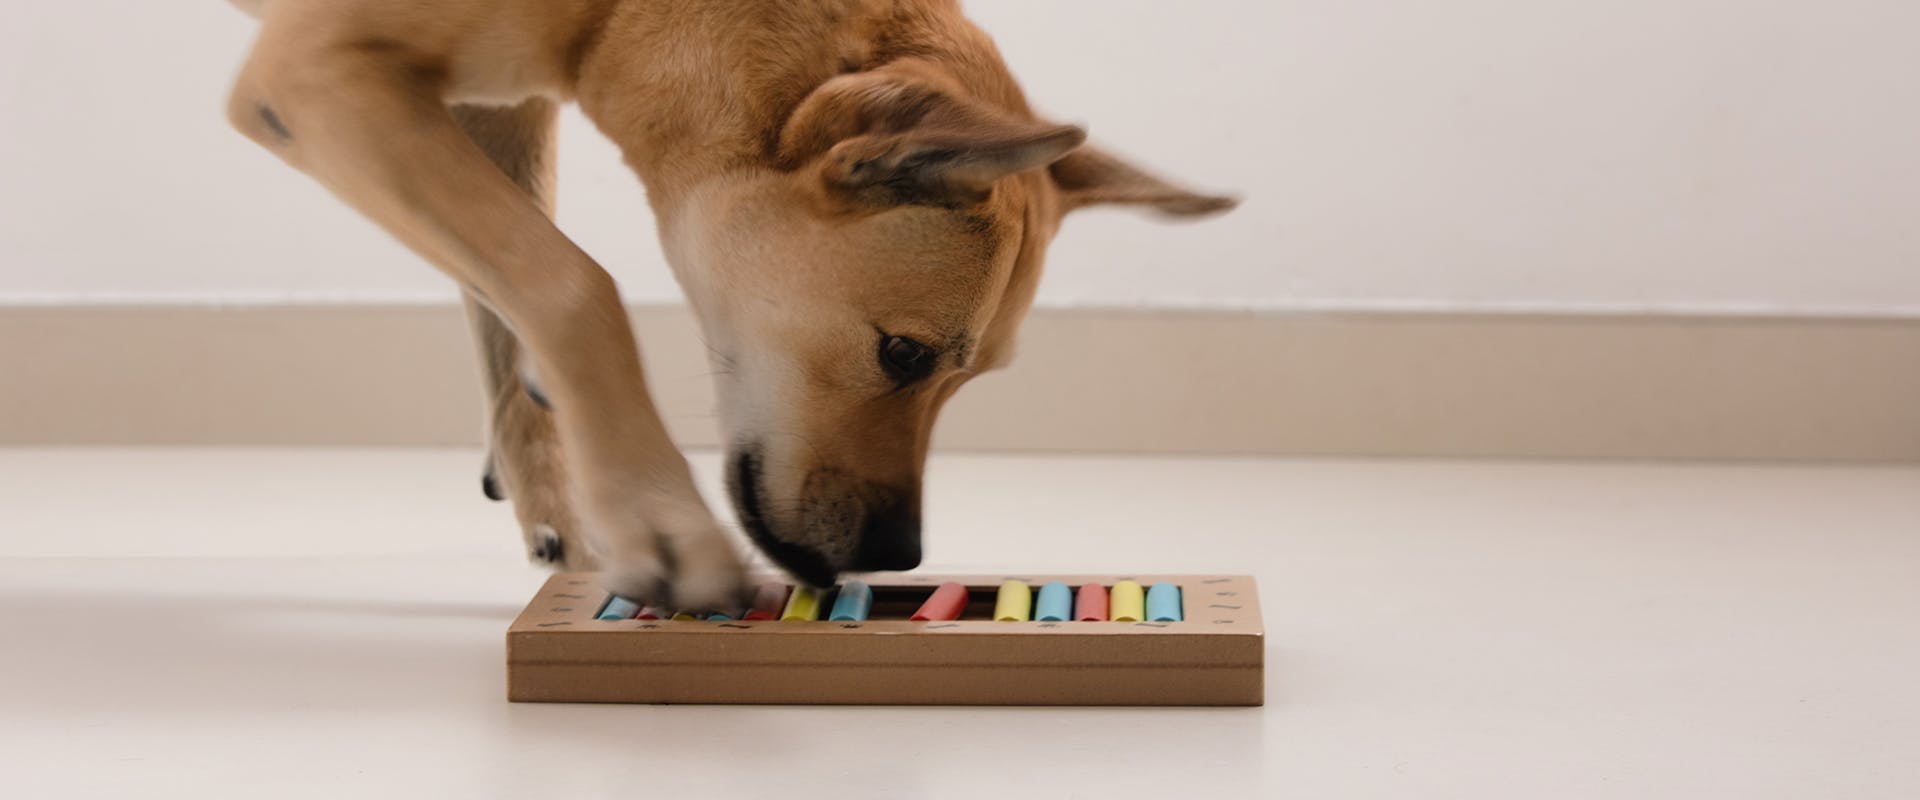 The 9 Best Treat-Dispensing Toys for Dogs